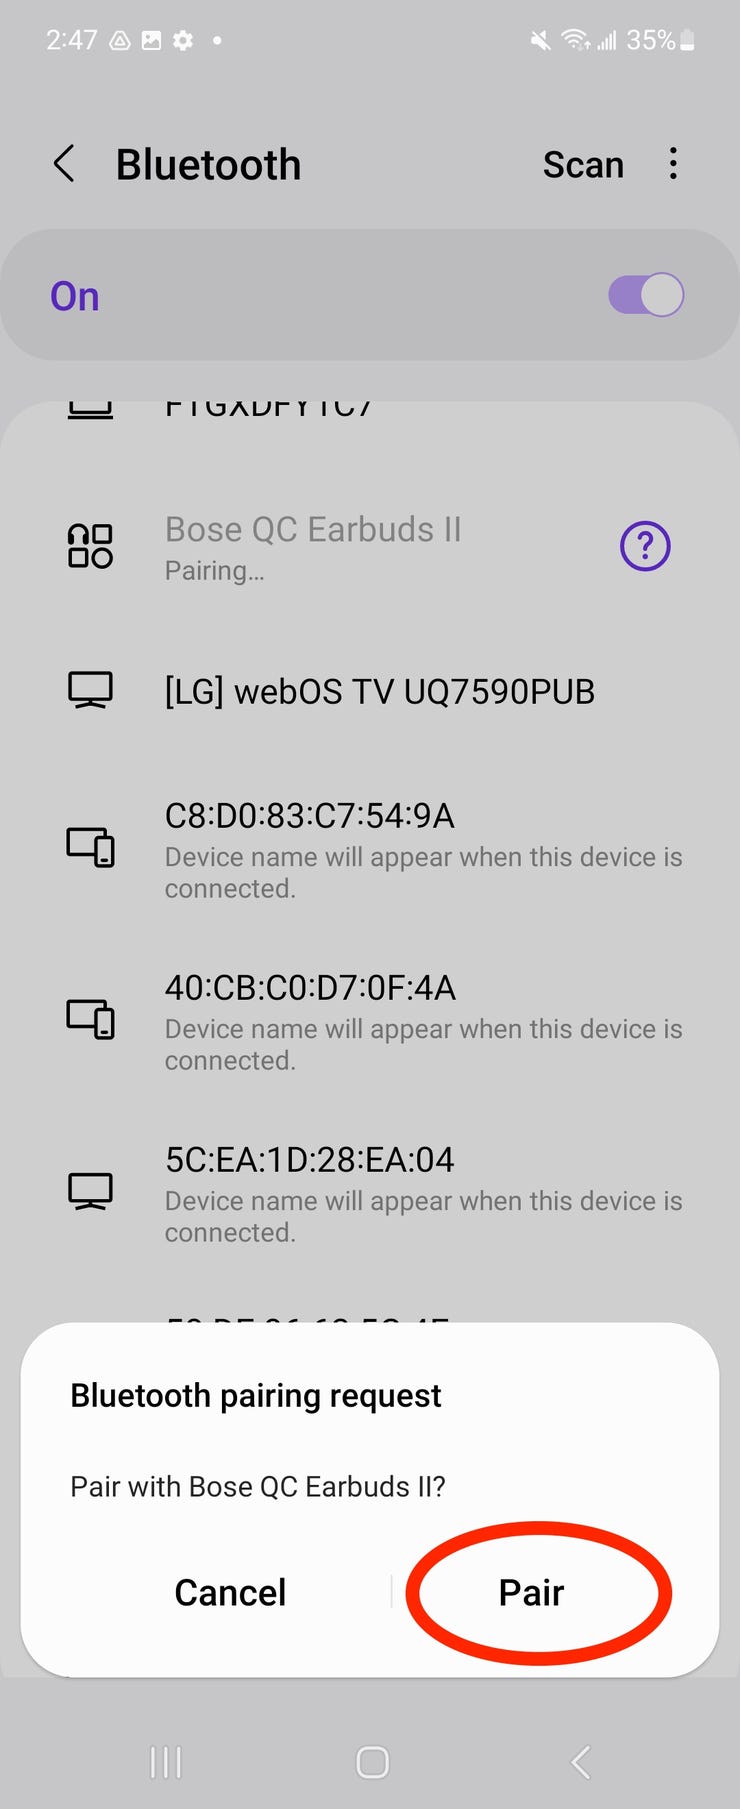 How to connect Bluetooth headphones to my Samsung Smart TV